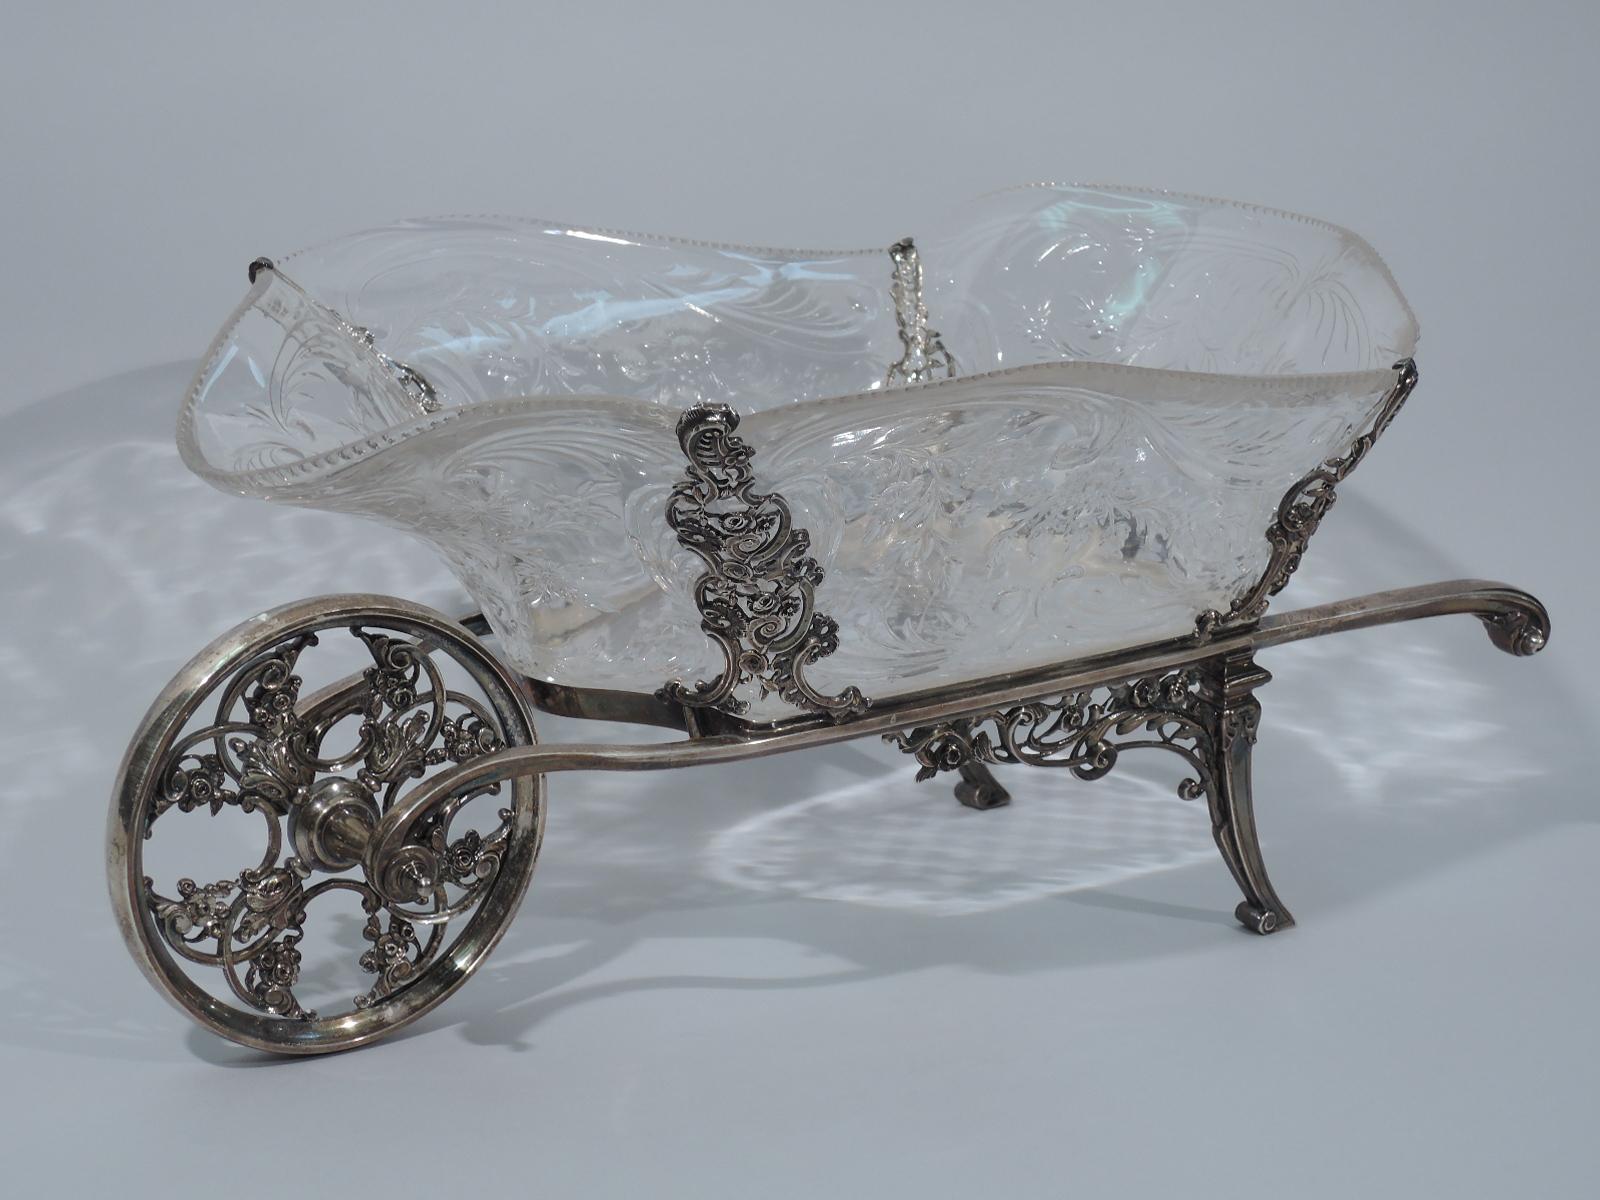 Edwardian sterling silver and crystal wheelbarrow. Made by William Comyns in London in 1907.

Shaped rectangular crystal bowl with cut flowers and leaves. Bowl set in sterling silver frame with two stretchers terminating in volute scrolls, front